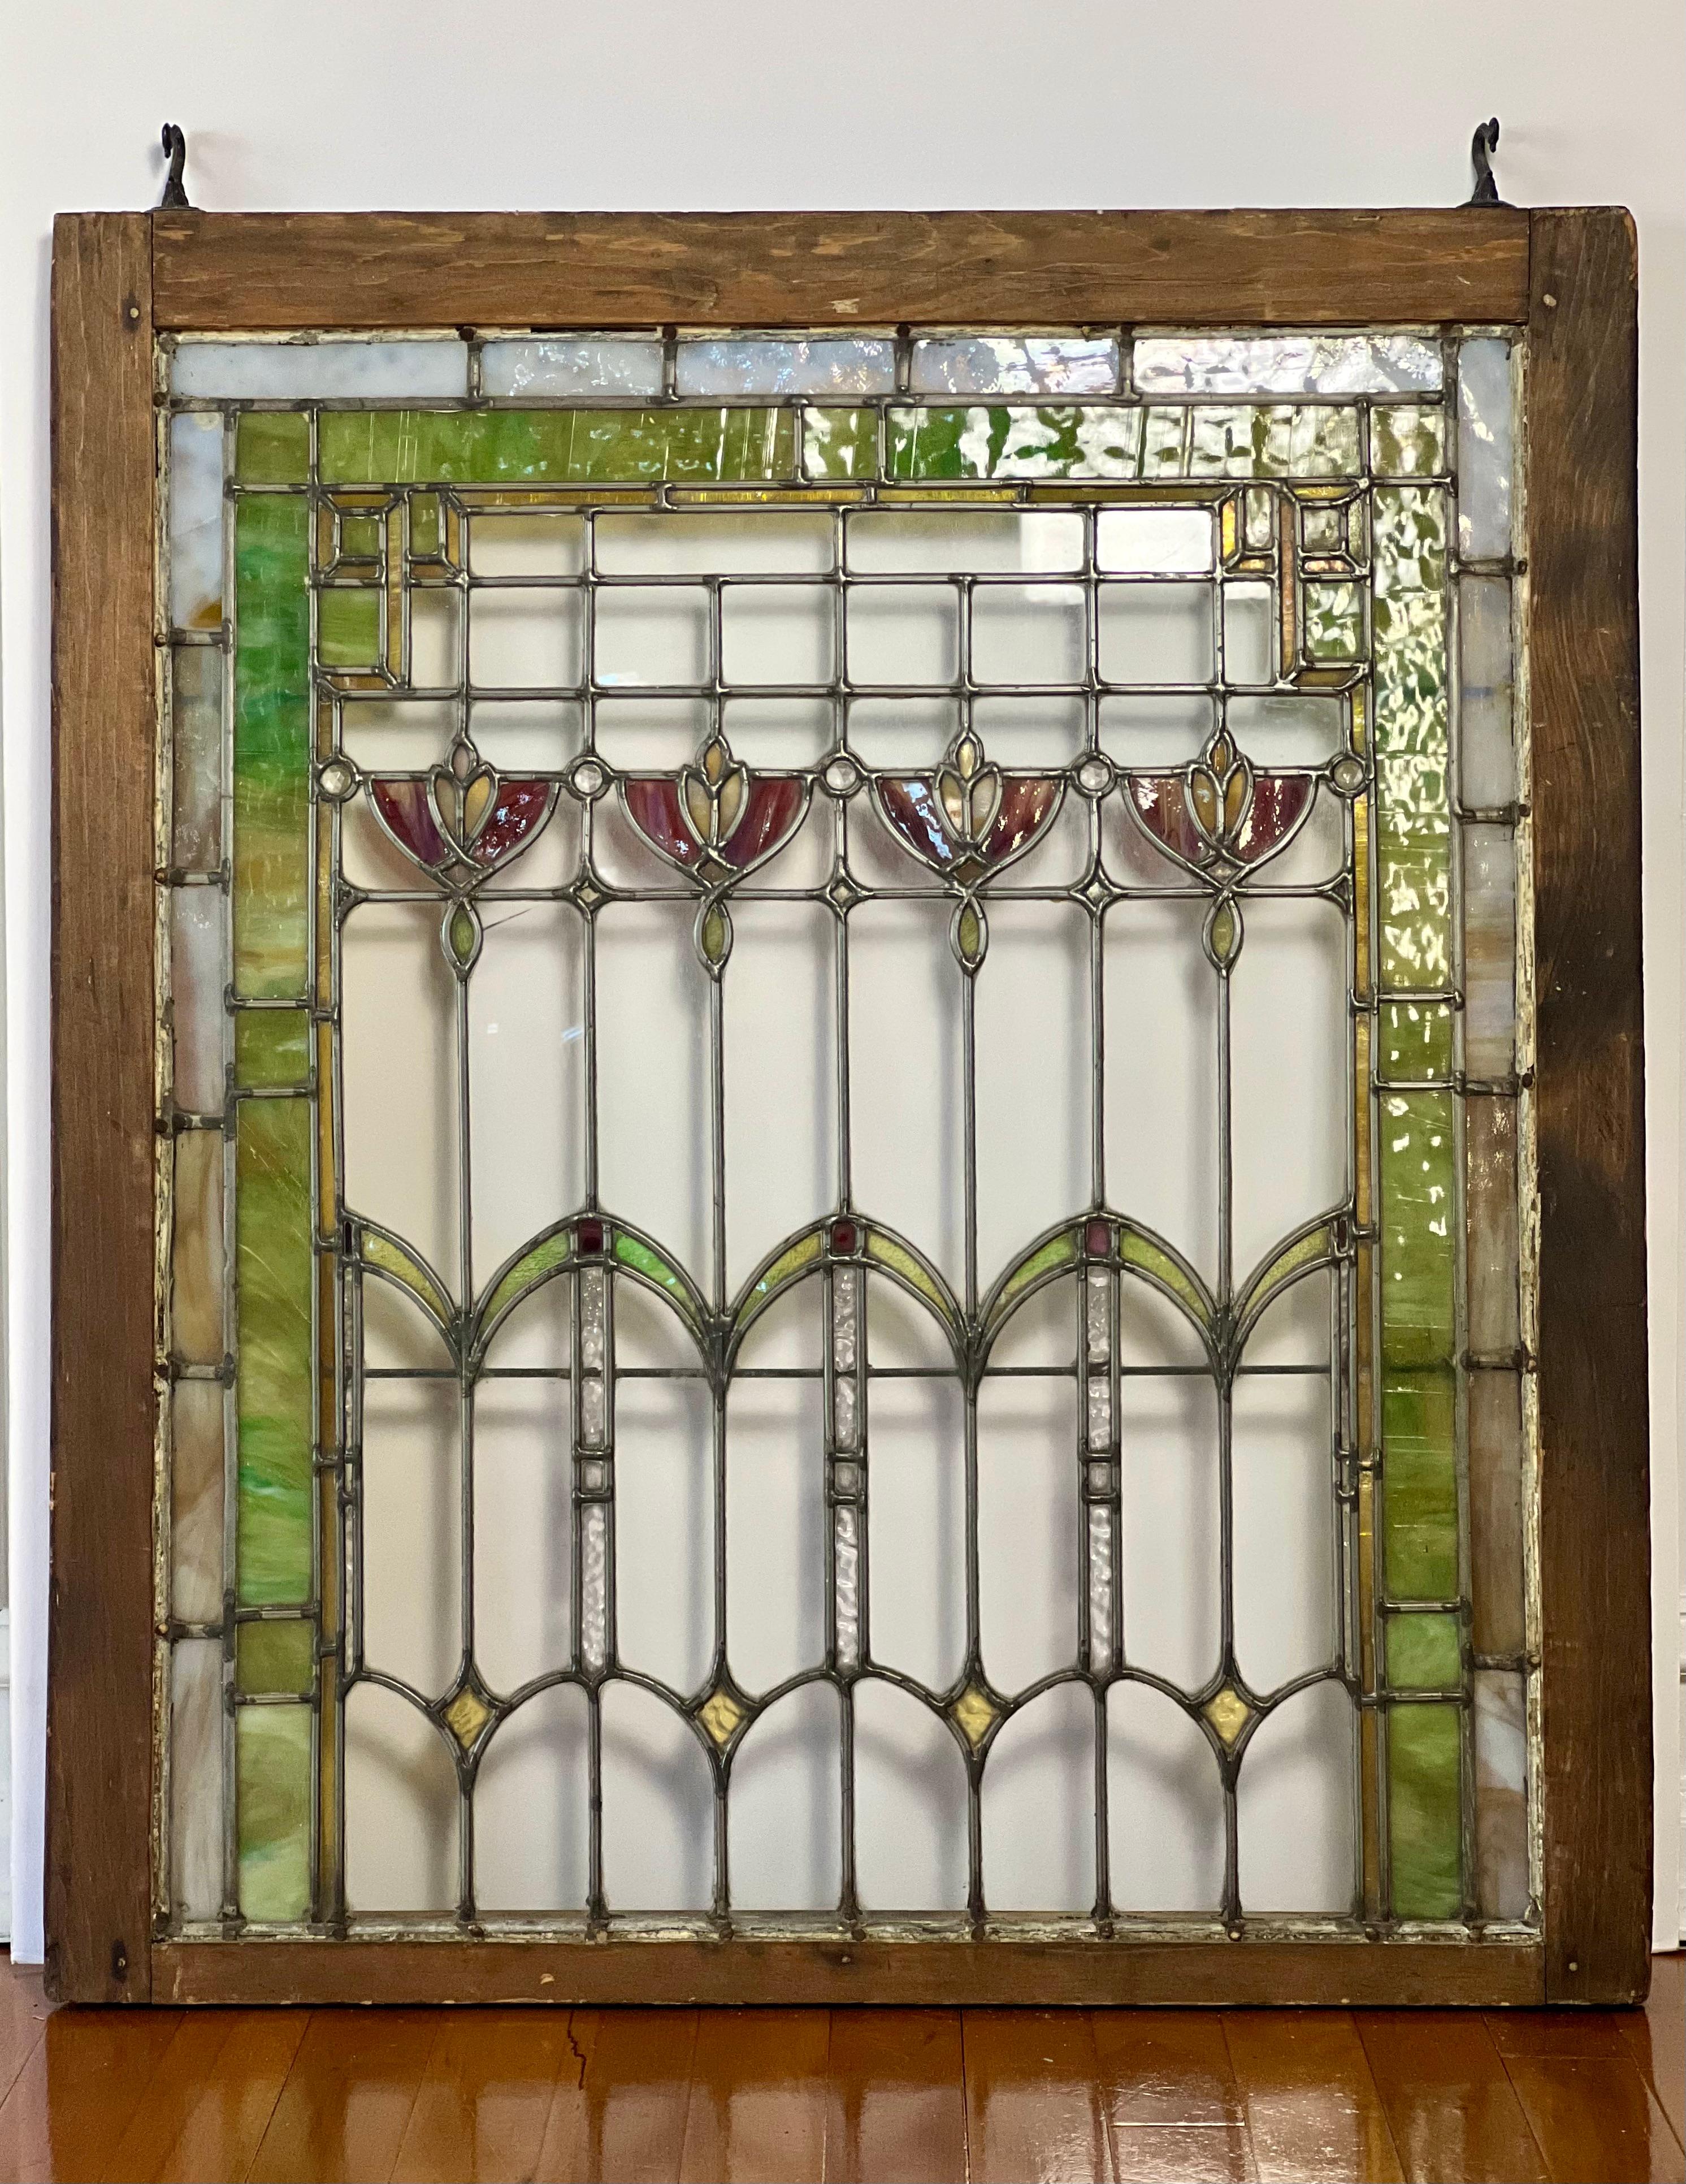 Arts and Crafts leaded stained and clear glass window with floral theme in wood frame, c. 1890-1910.

Balance and beauty come together in soft shades of green, ruby, blush, pale blue and hints of gold to form this stunning floral design. Geometric